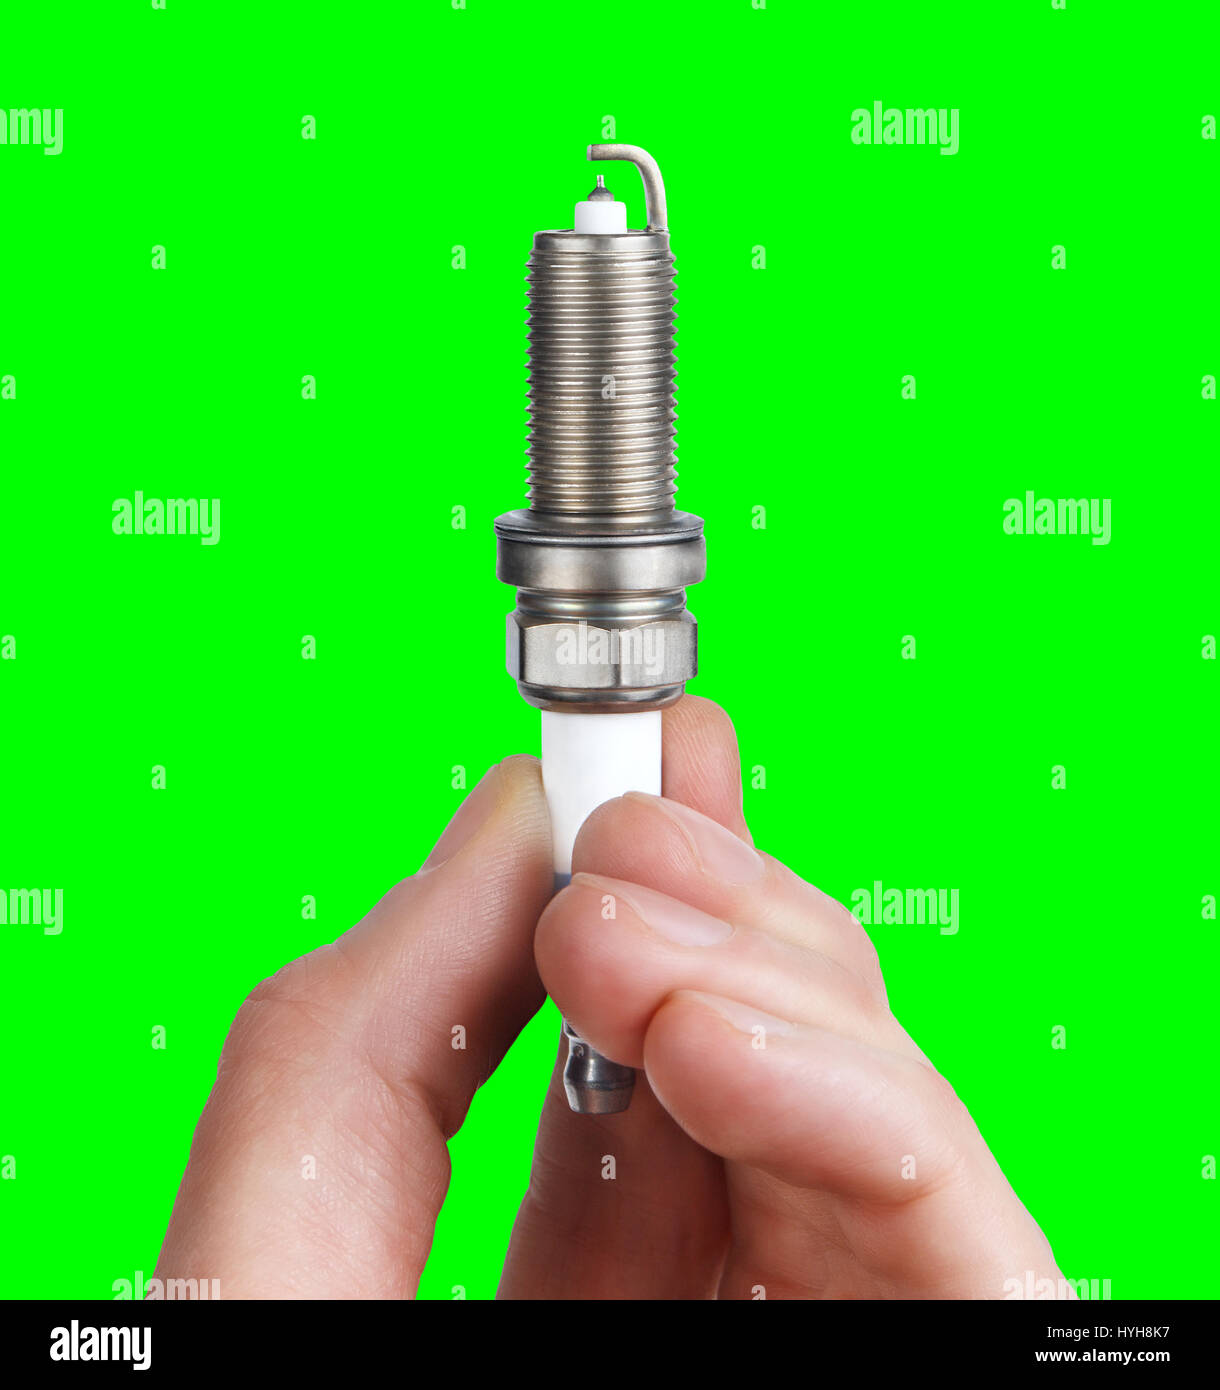 Mechanic holds a spare part spark plug in his hand. Auto part spark plug close-up on a green screen background. Stock Photo